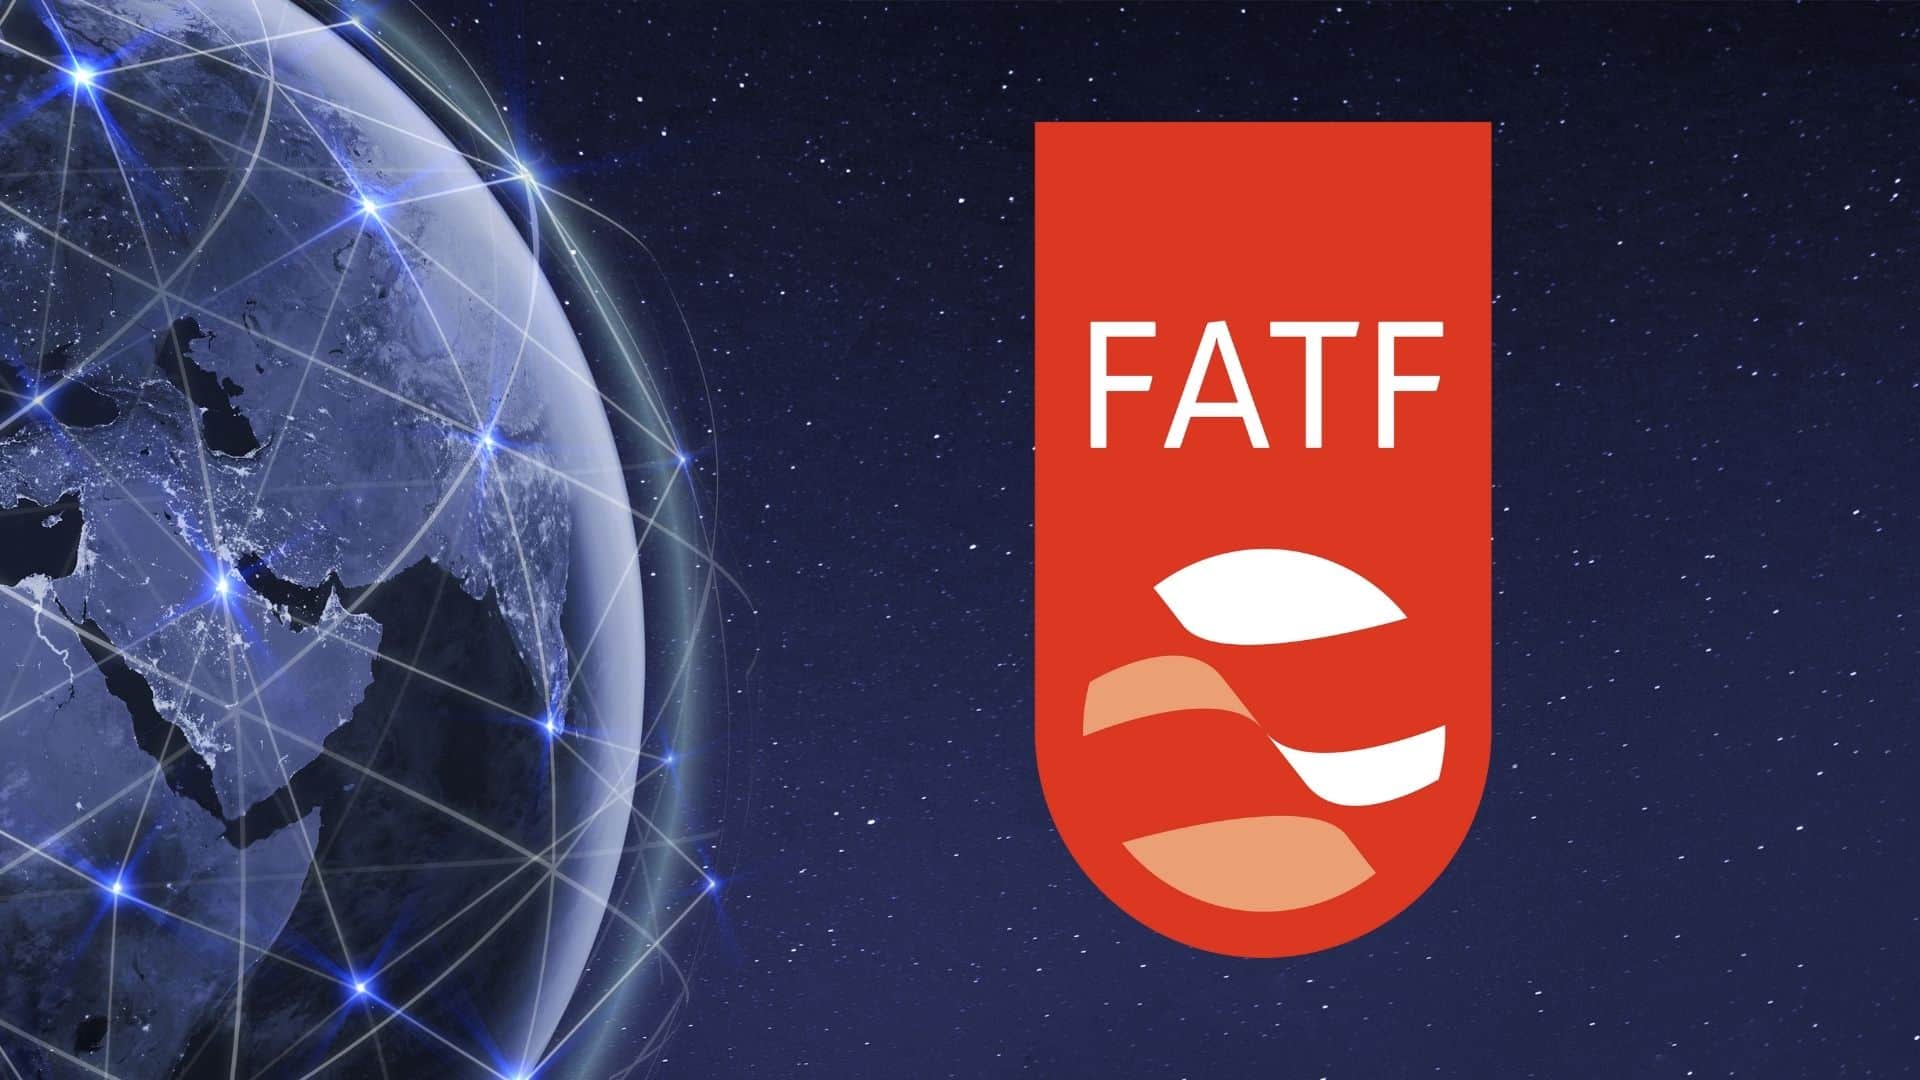 FATF updates regulatory guidance for crypto industry